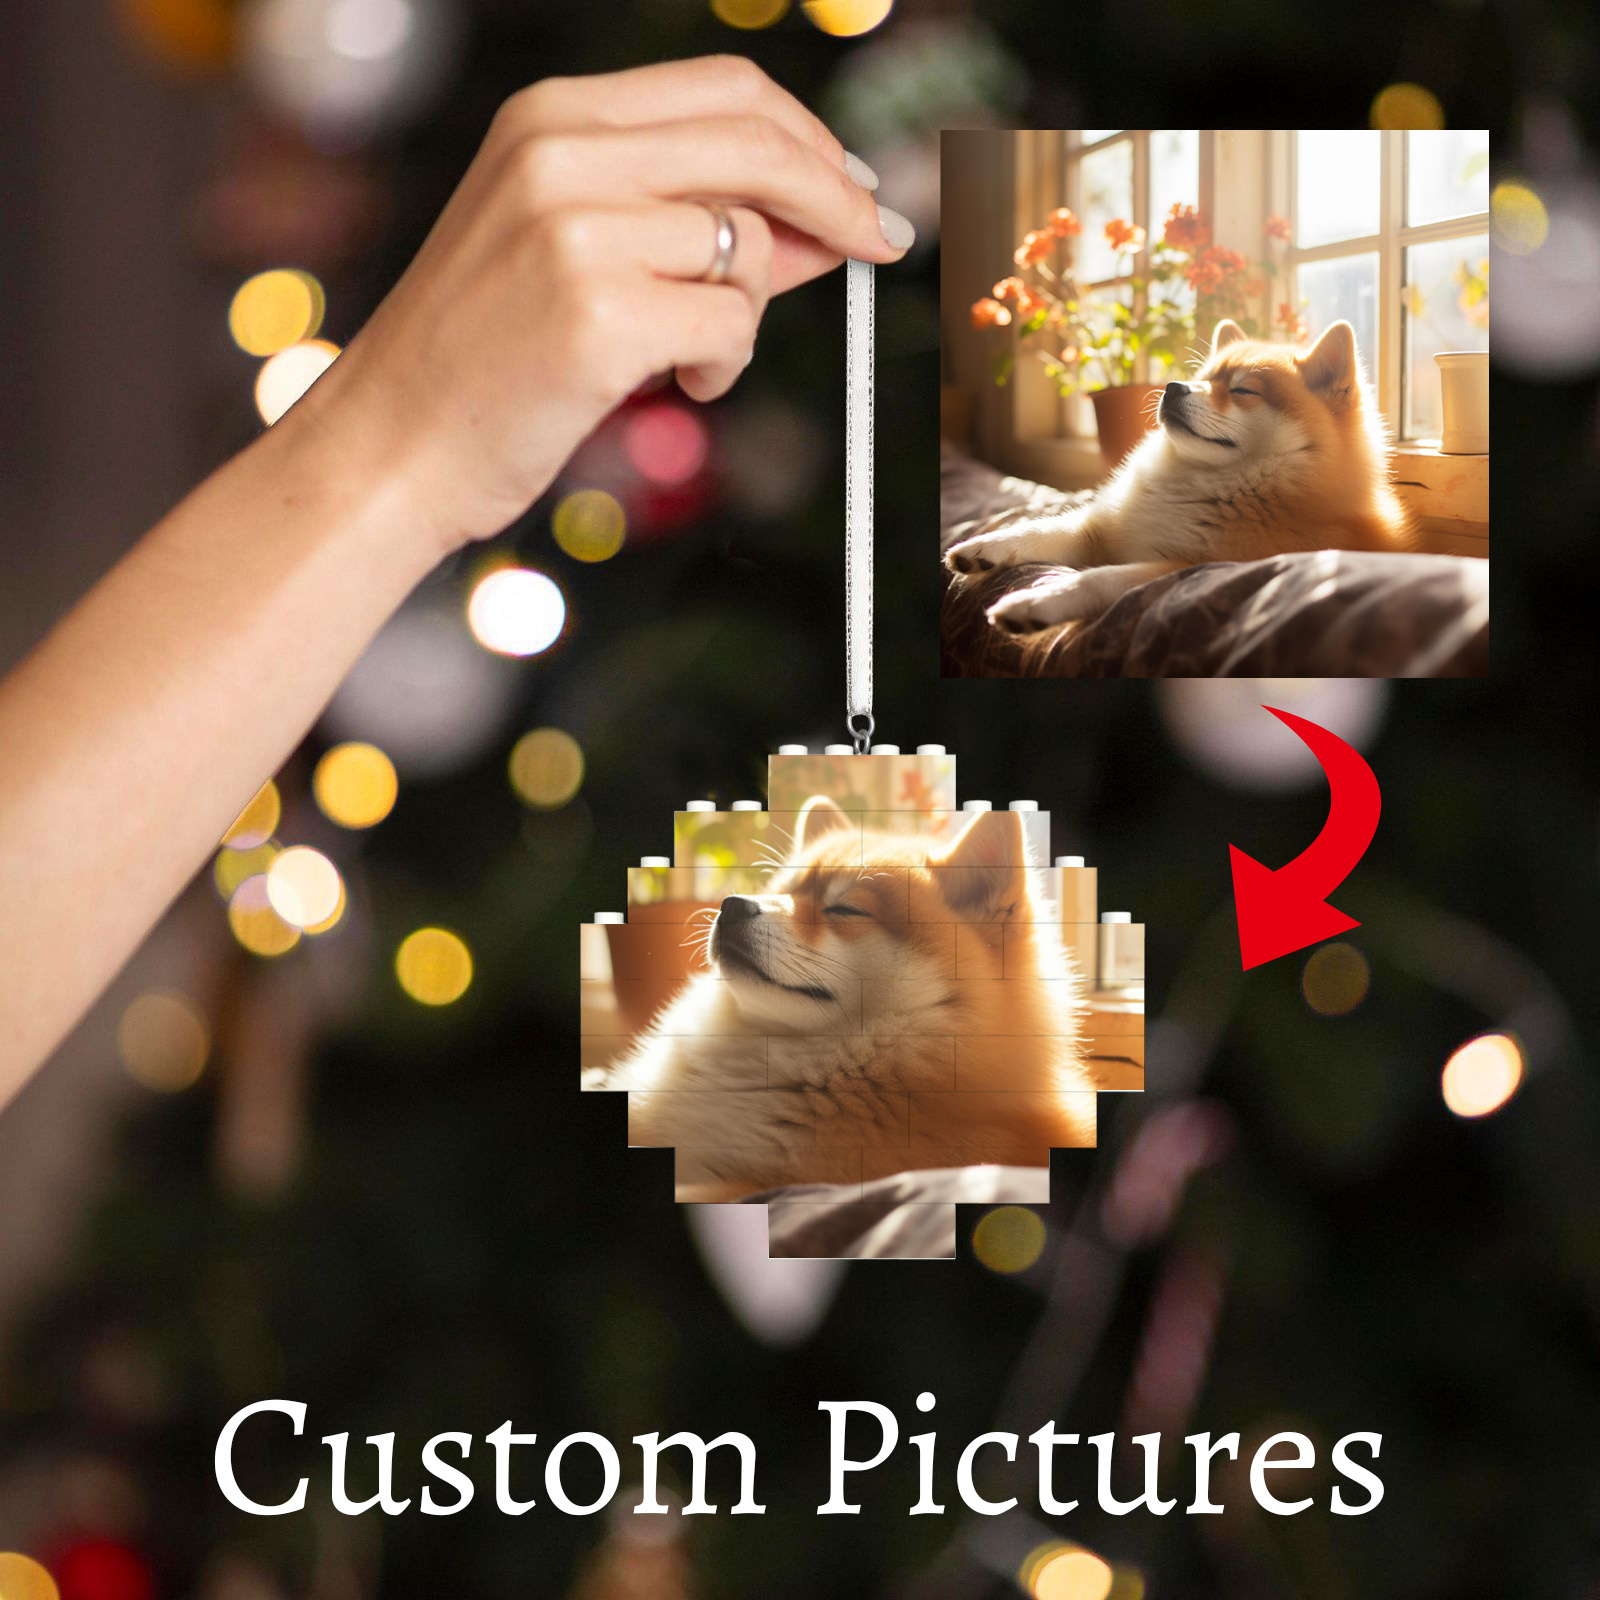 

1pc, Brick Personalized Pet Photo Block Puzzle Rhomboid Shaped Picture Customized Valentines Day Gifts For Him, Her, Couples